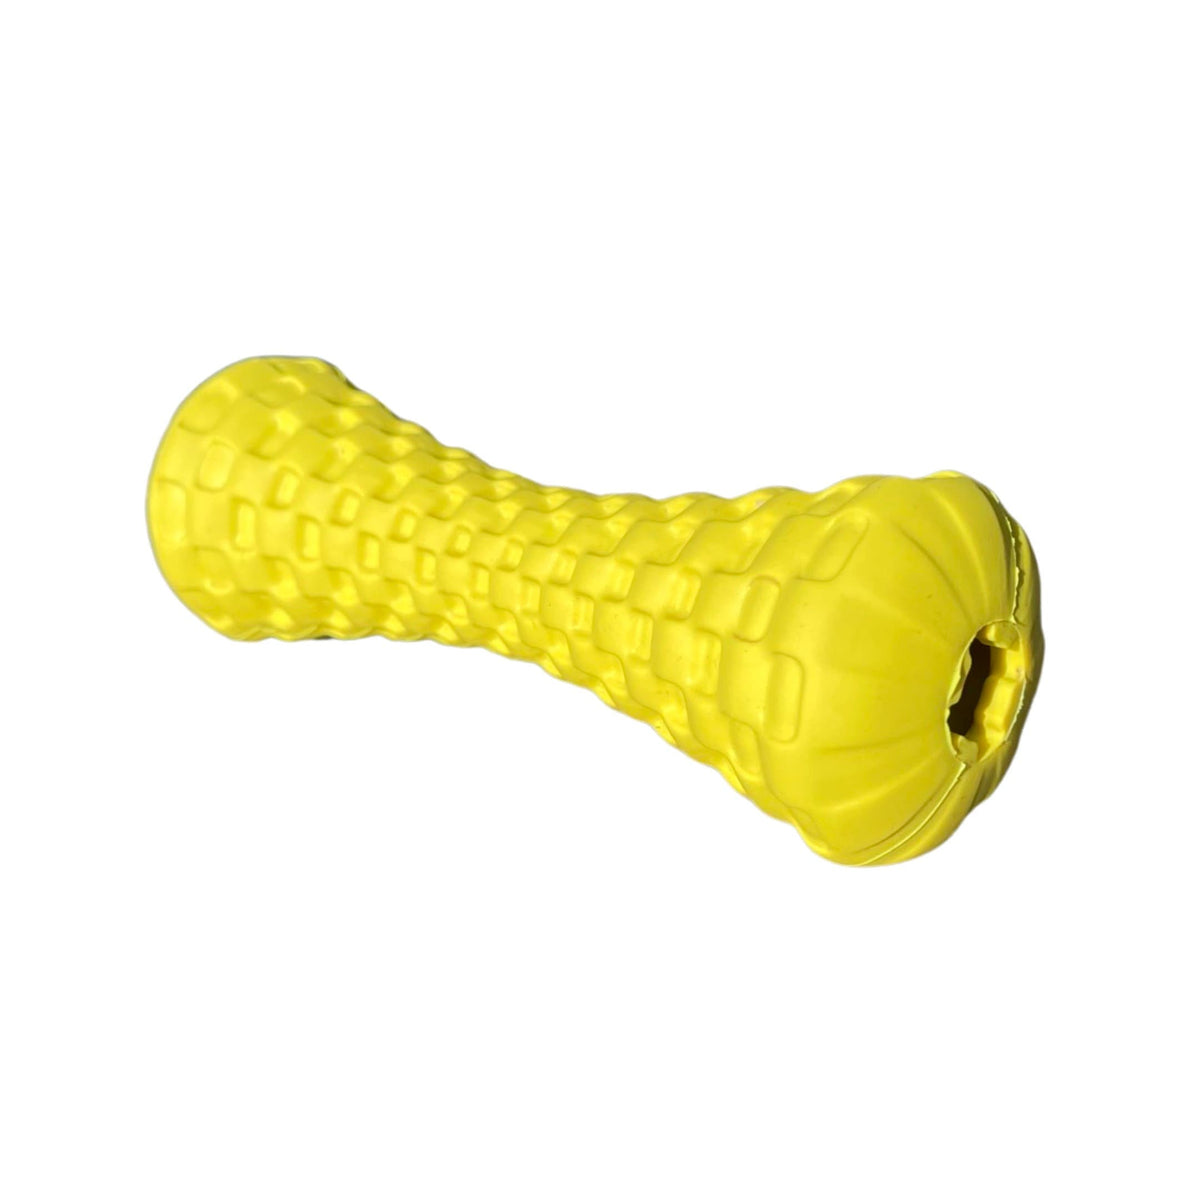 Rubber Dog Toy Canada